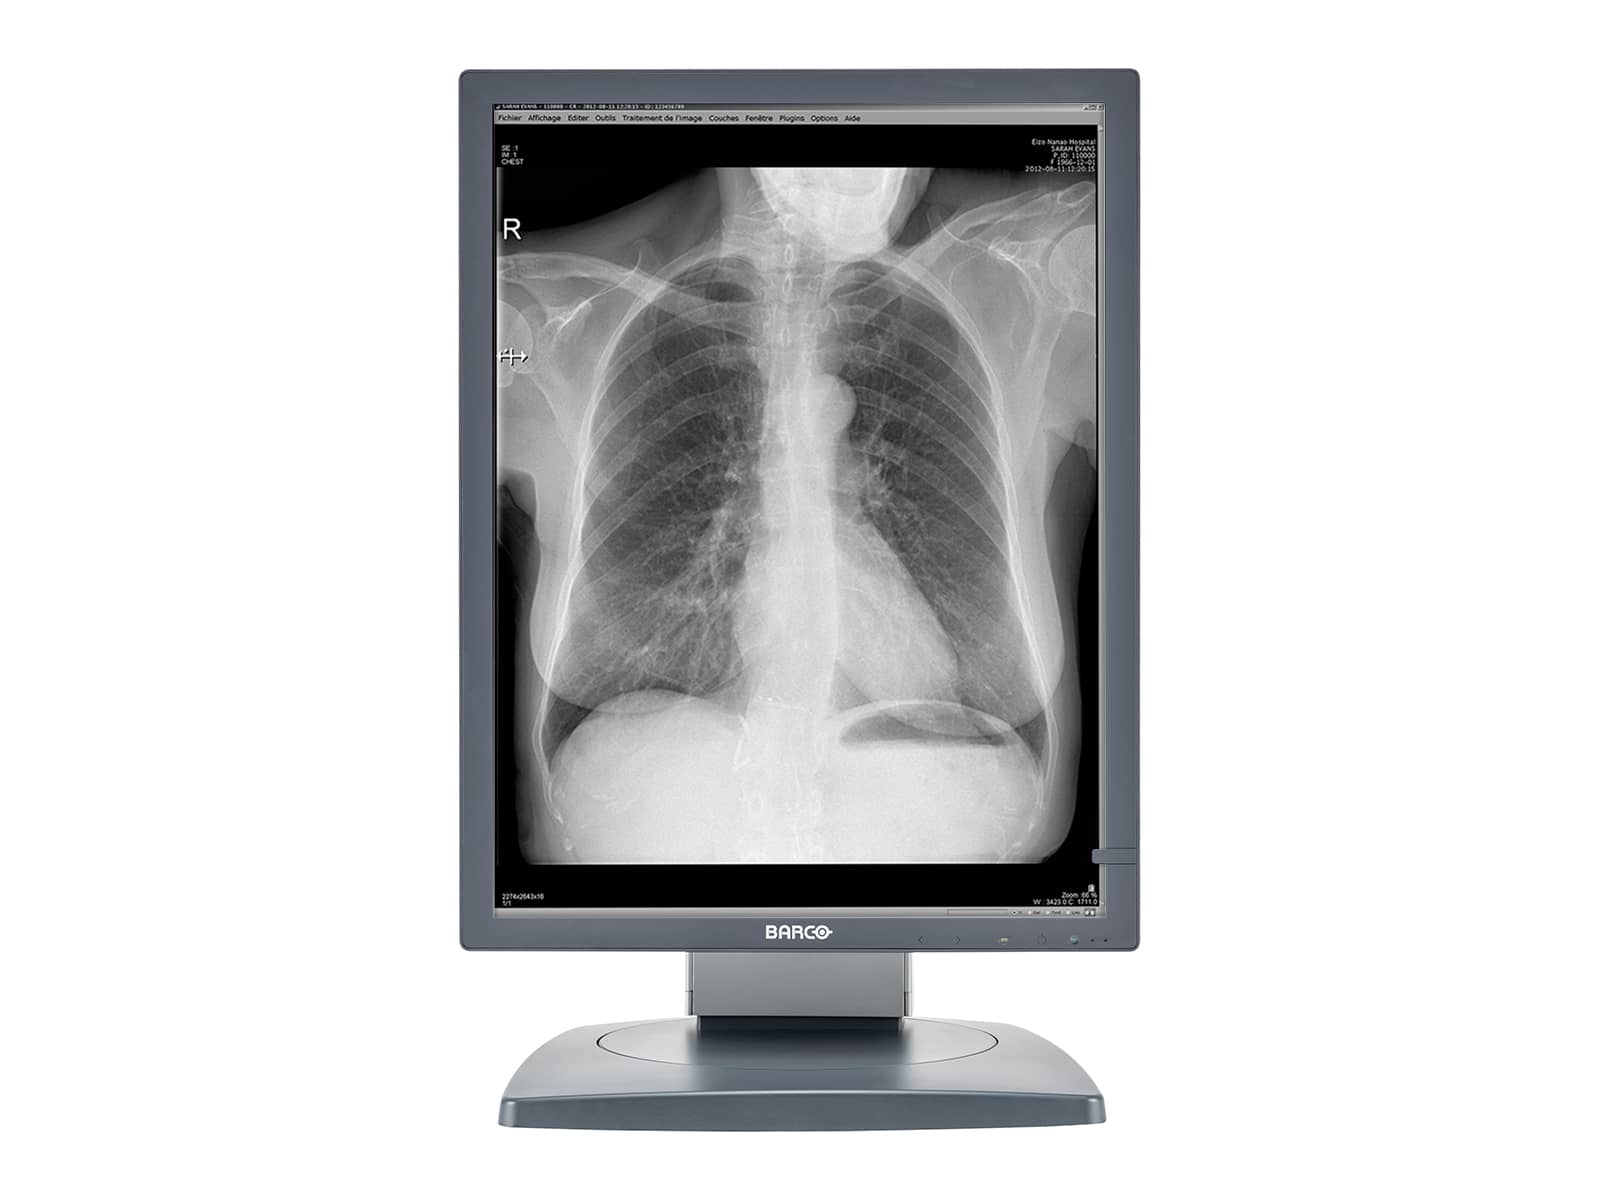 Barco Coronis MDCG-3120 3MP 21" Grayscale General Radiology Diagnostic Display (K9601662) Monitors.com 